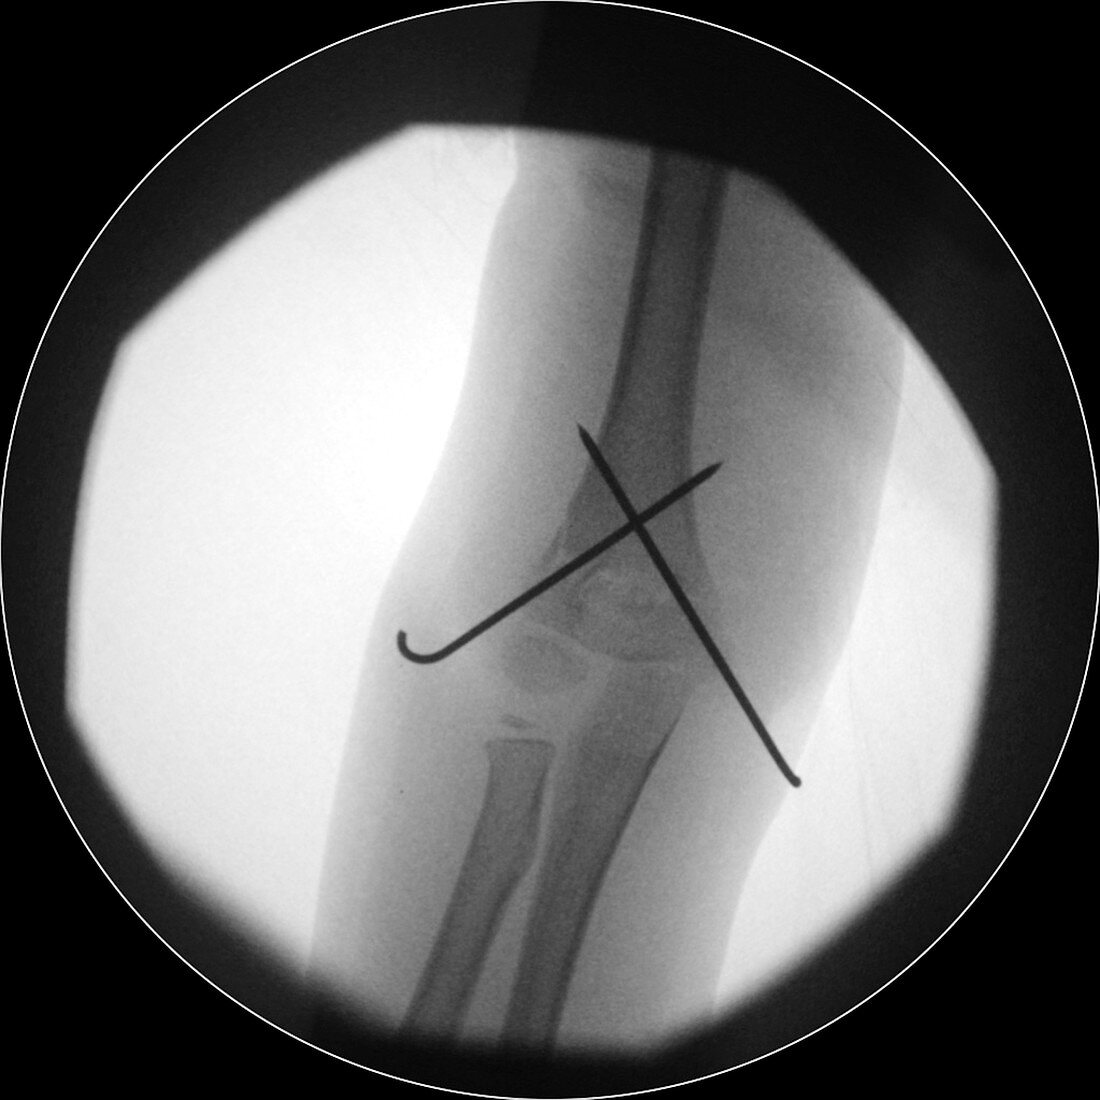 Fixed arm fracture,X-ray